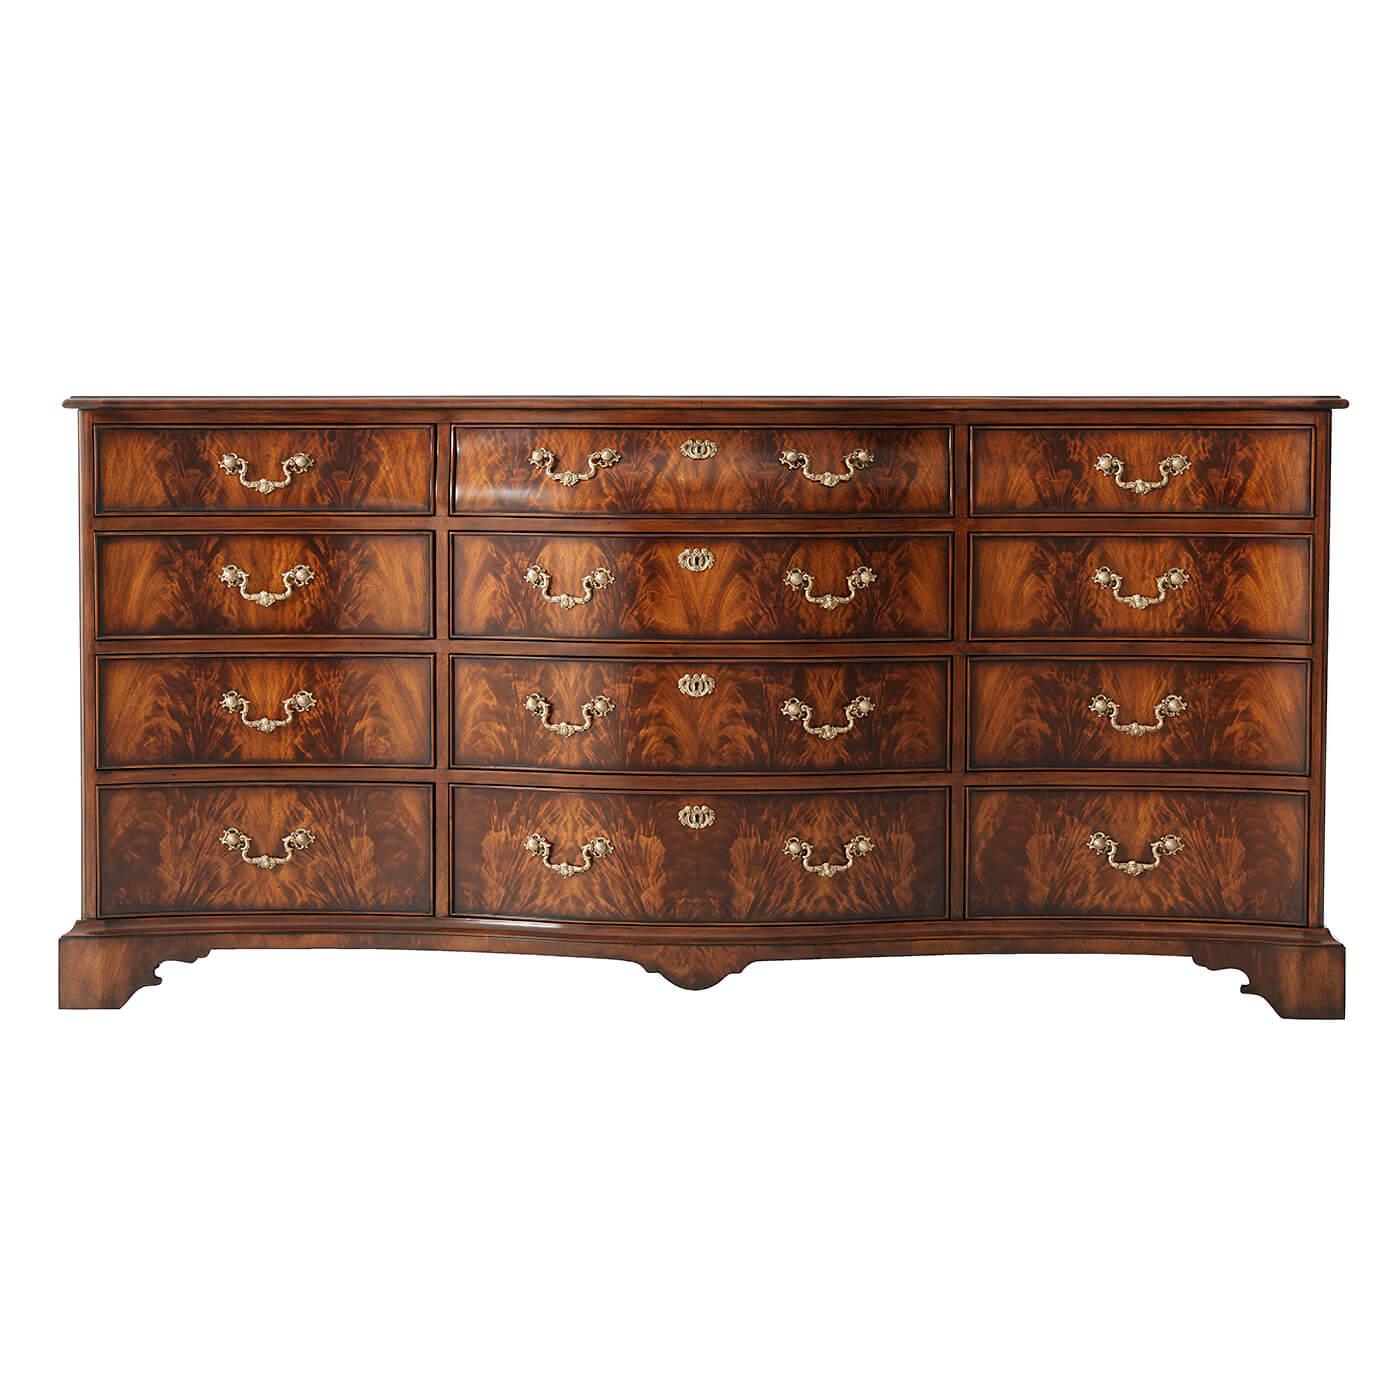 A fine Chippendale style flame mahogany and mahogany serpentine dresser, the molded edge top above an arrangement of twelve bomb and shaped drawers with brass handles and escutcheons, on ogee bracket feet. Inspired by a George III original in the